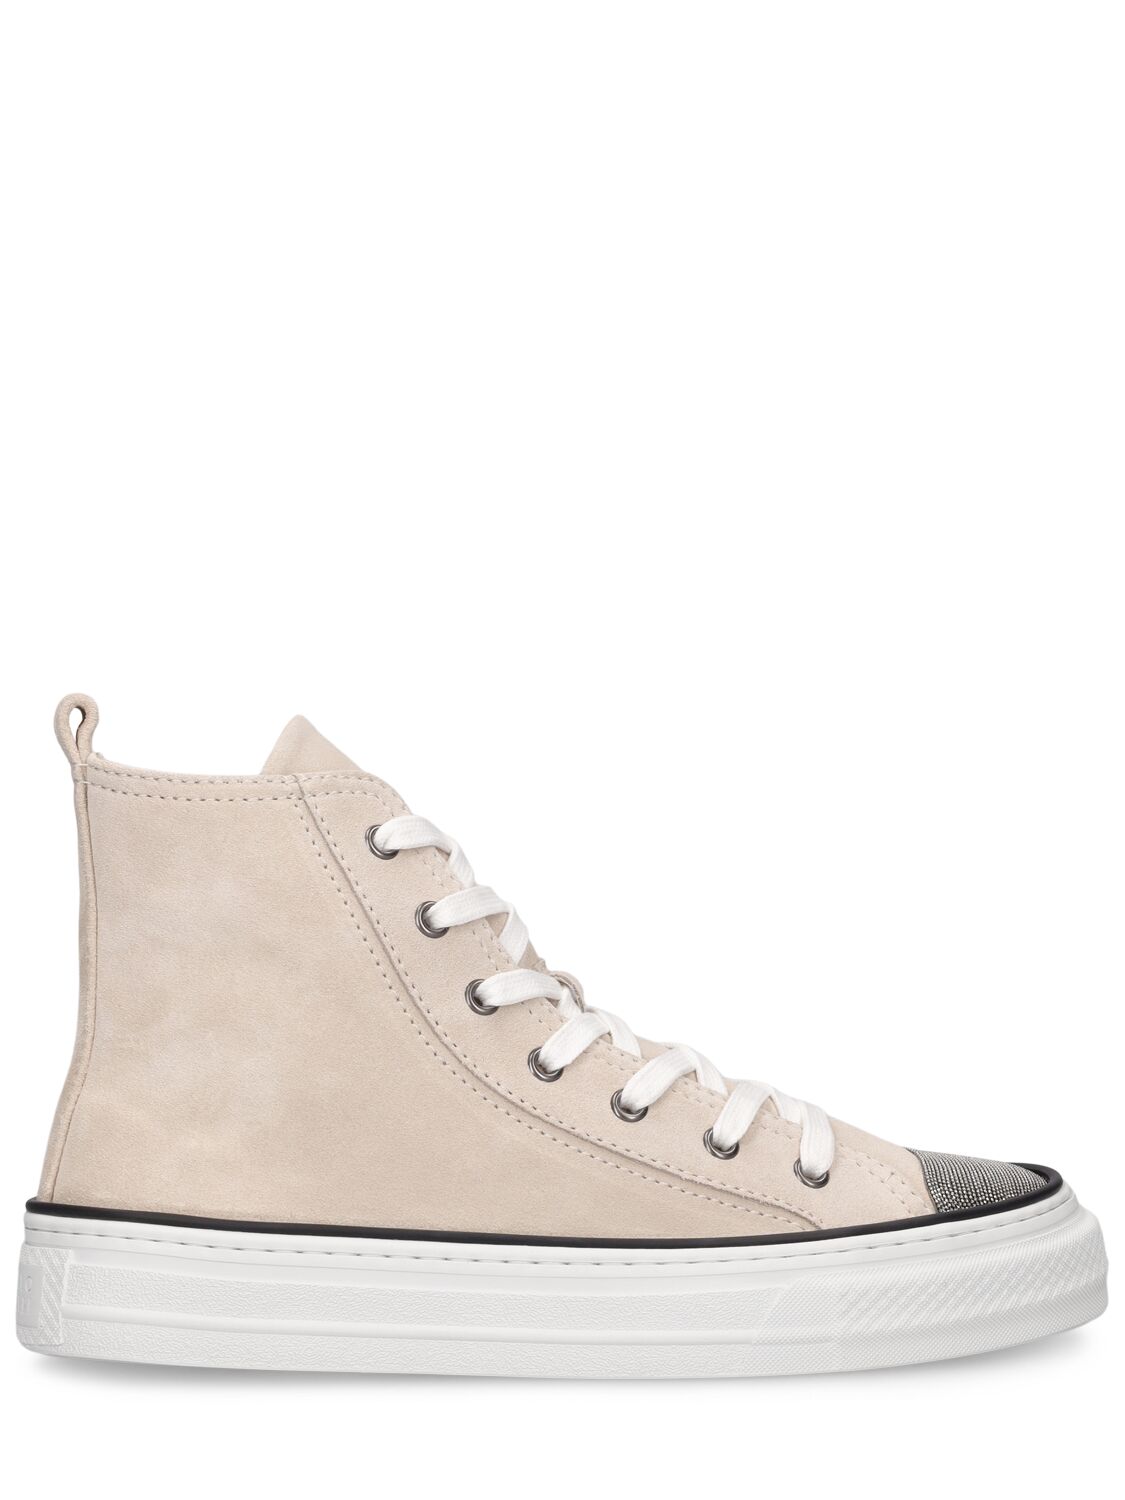 Image of 20mm Suede High Top Sneakers